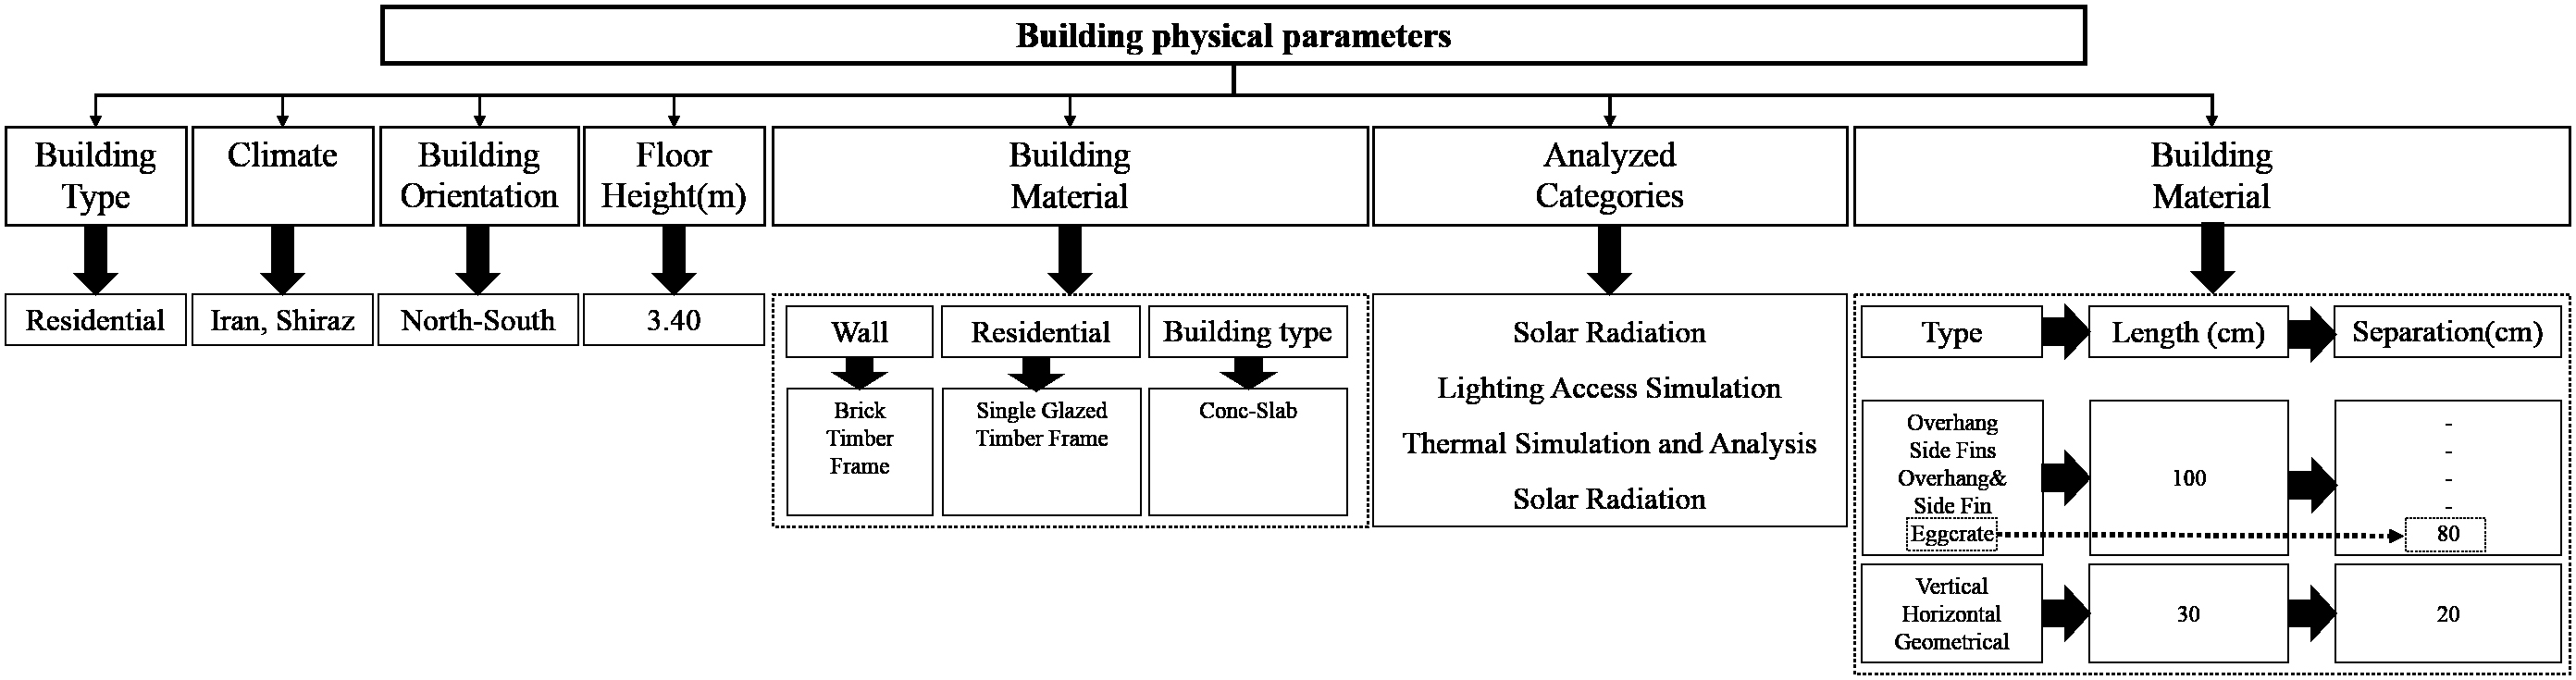 Building physical parameters for the models used in the simulations.